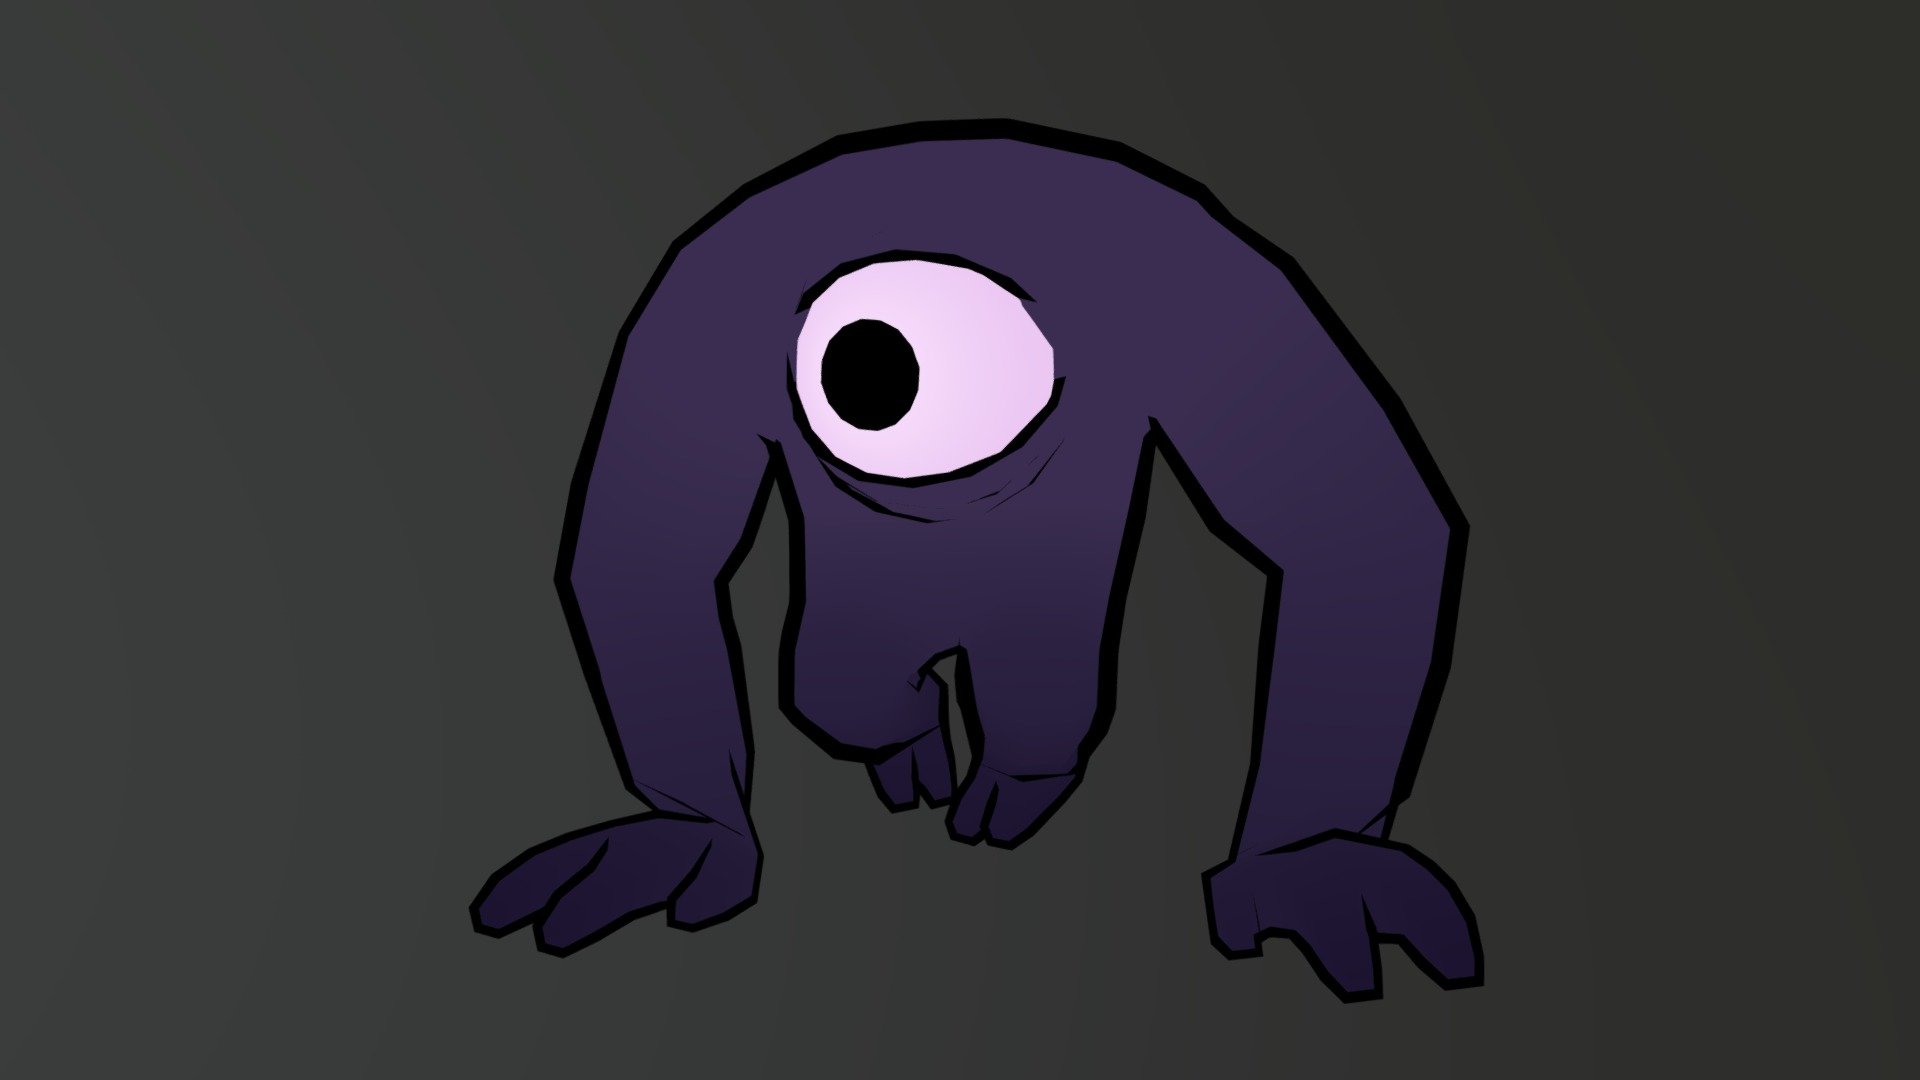 Mob enemy for a Feudal Japan stealth game. Its weak point is its giant eyeball.

Concept Art - Imp Yokai - Download Free 3D model by tranb95 3d model